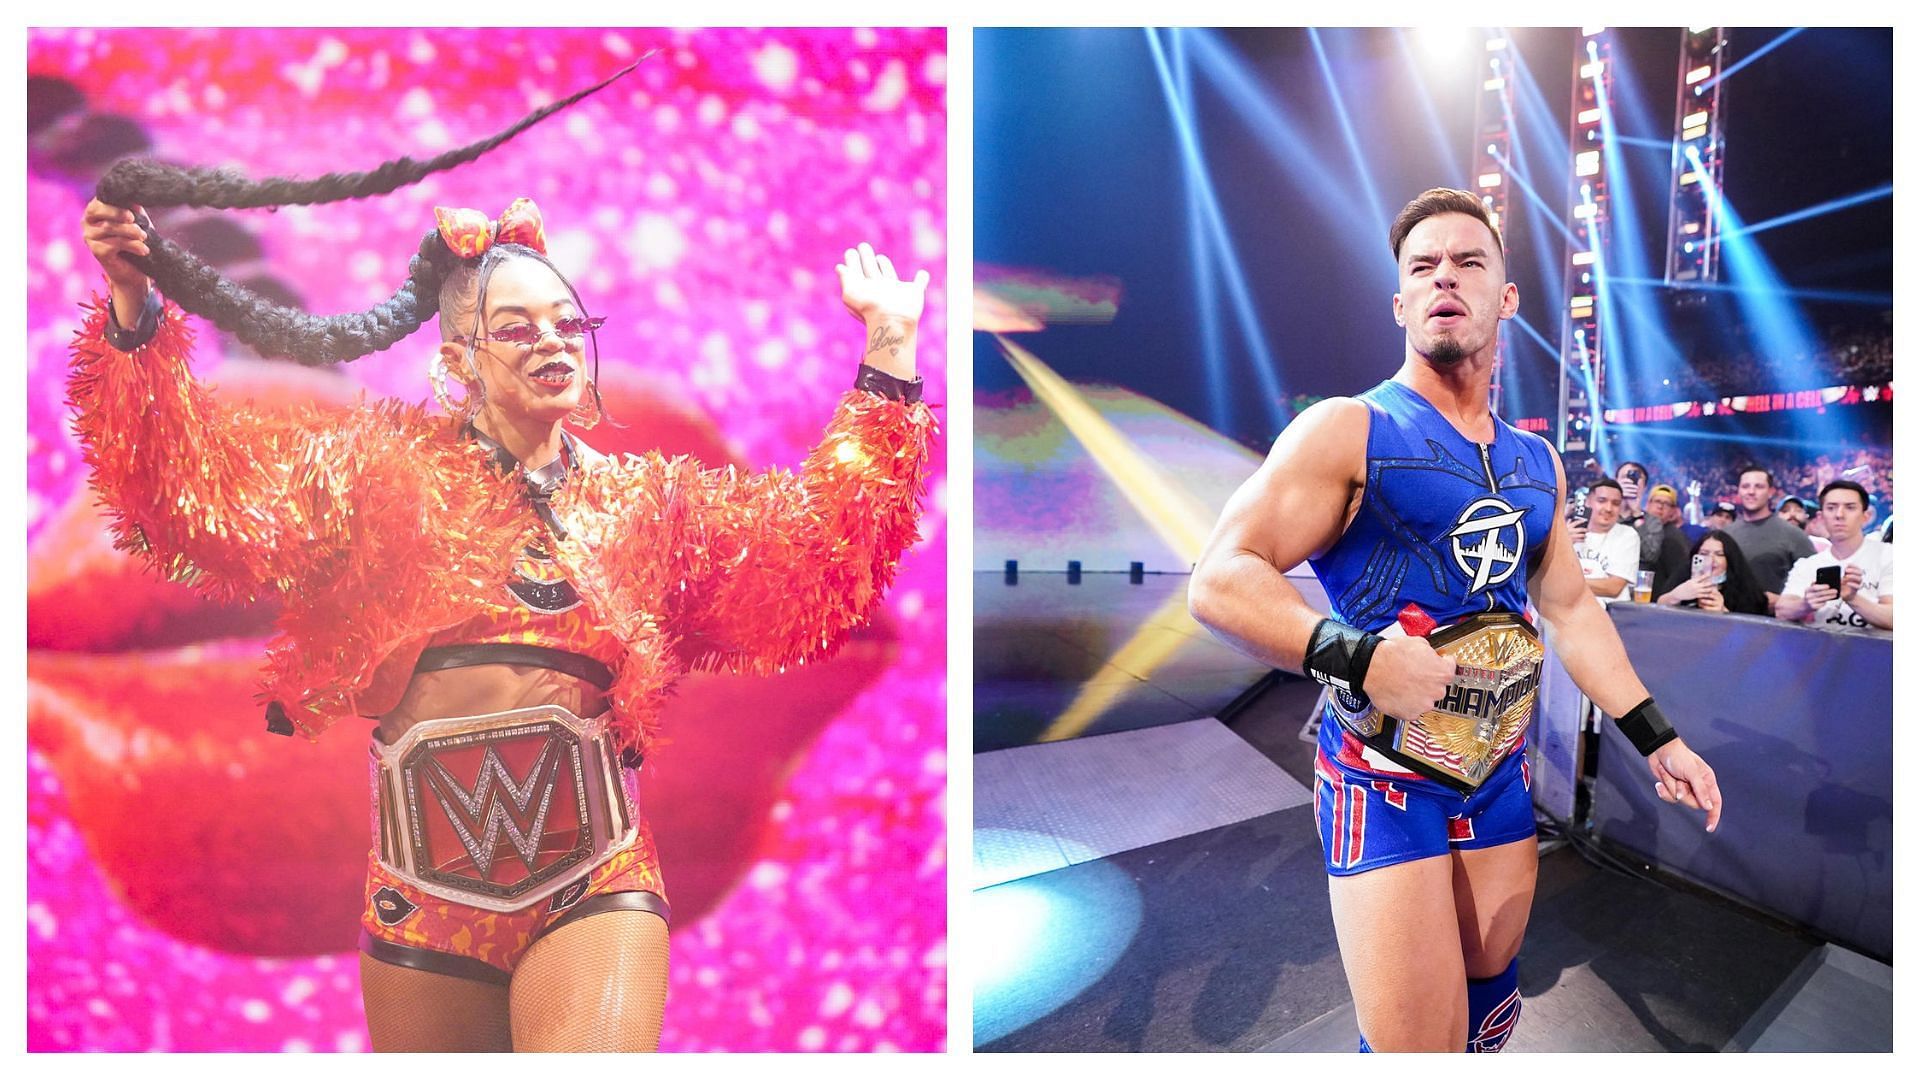 Theory and Bianca Belair successfully defended their championships at HIAC